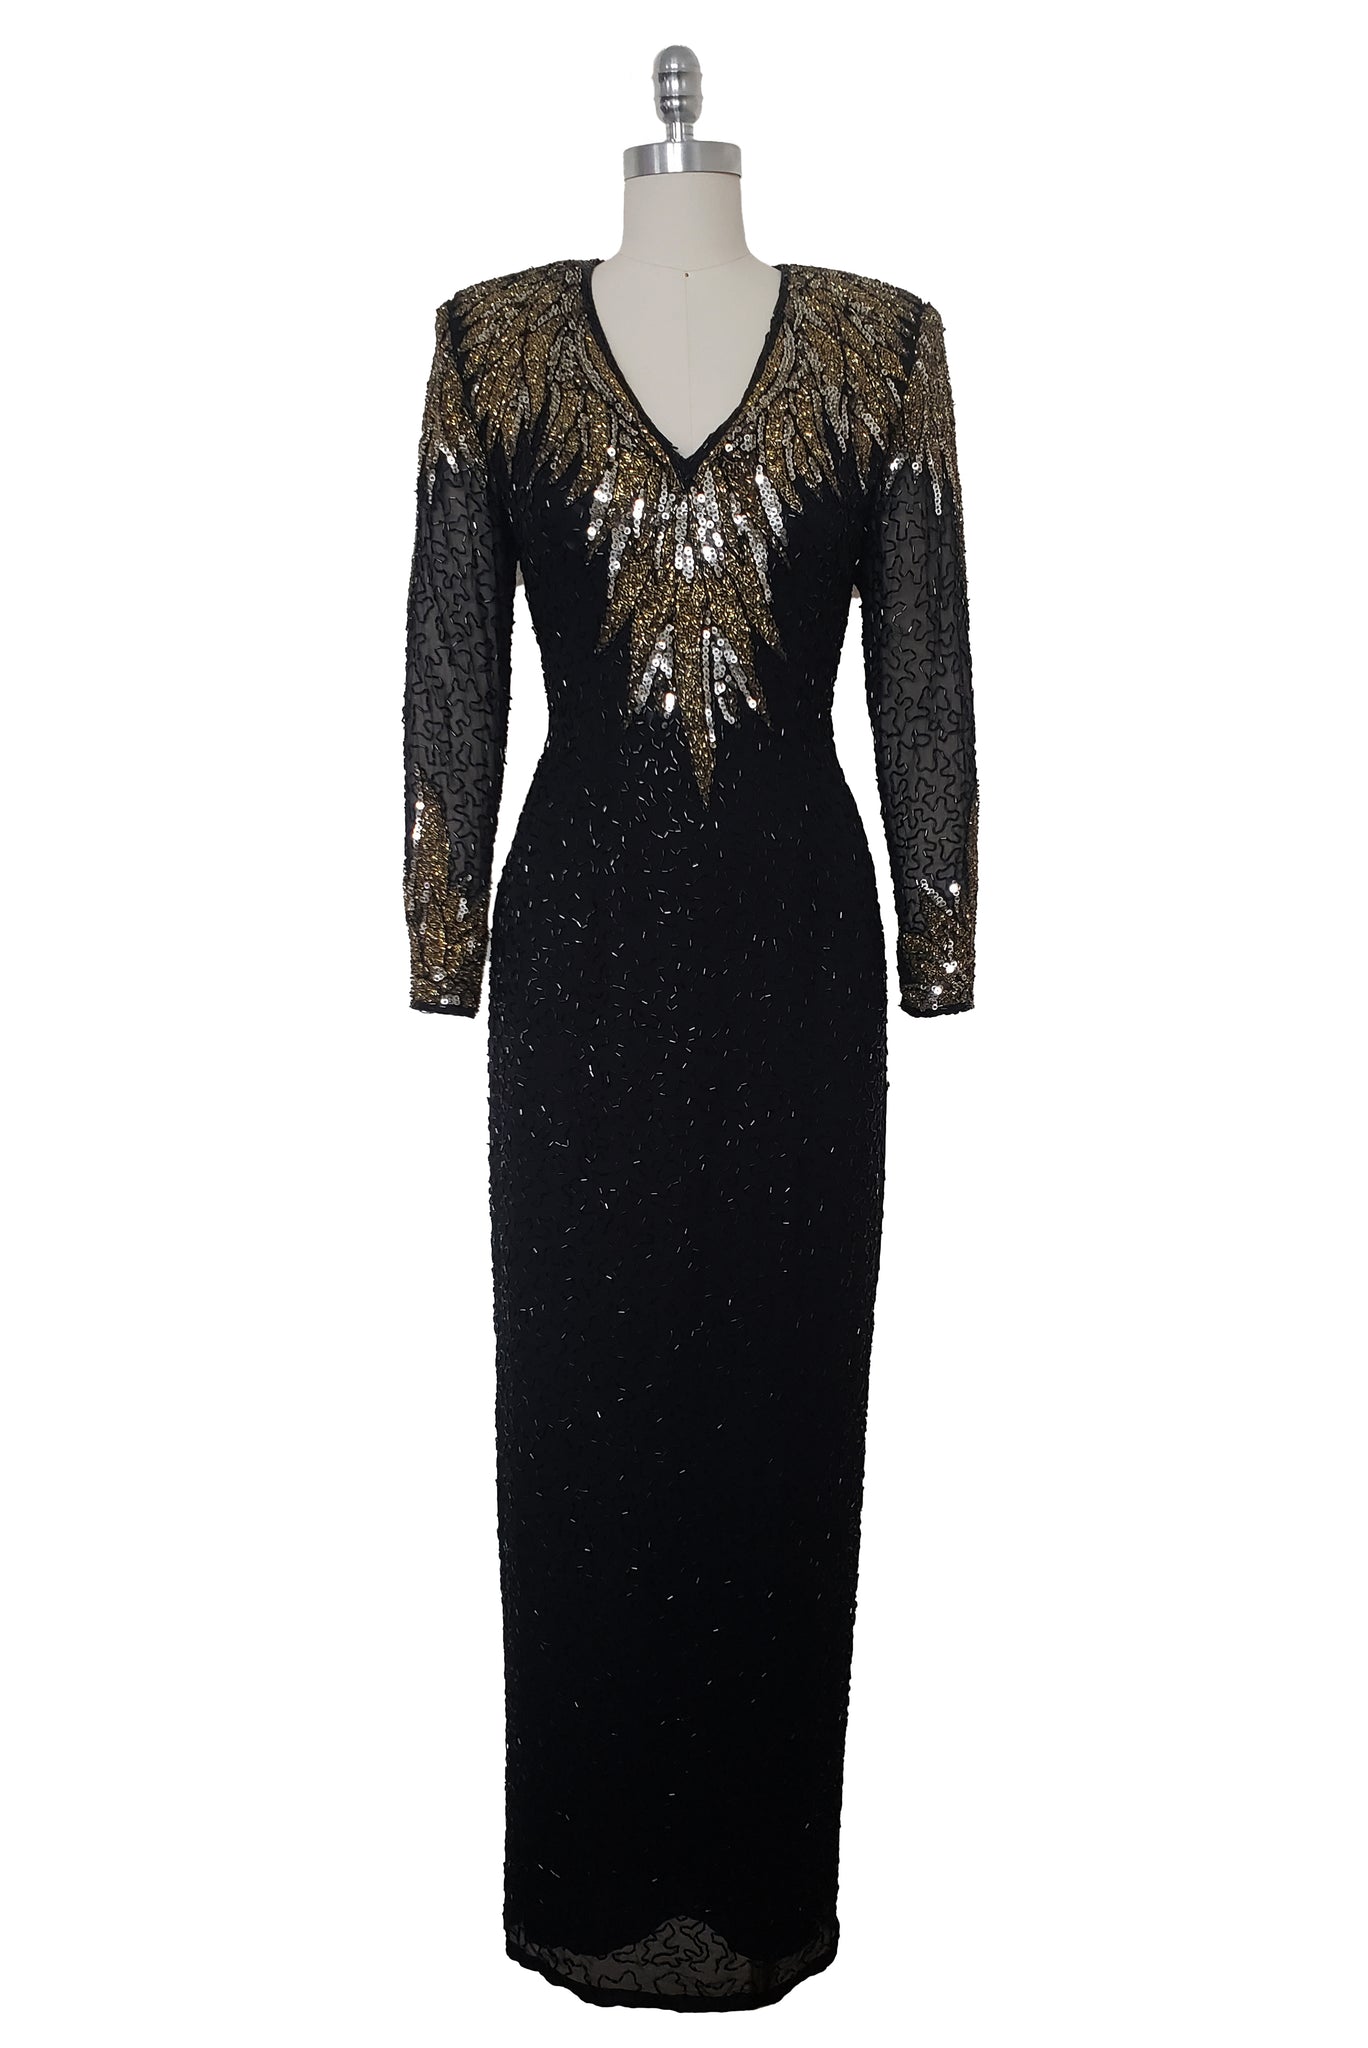 1990s Vintage Black Beaded Open Back Evening Dress by Oleg Cassini, Extra Small to Small